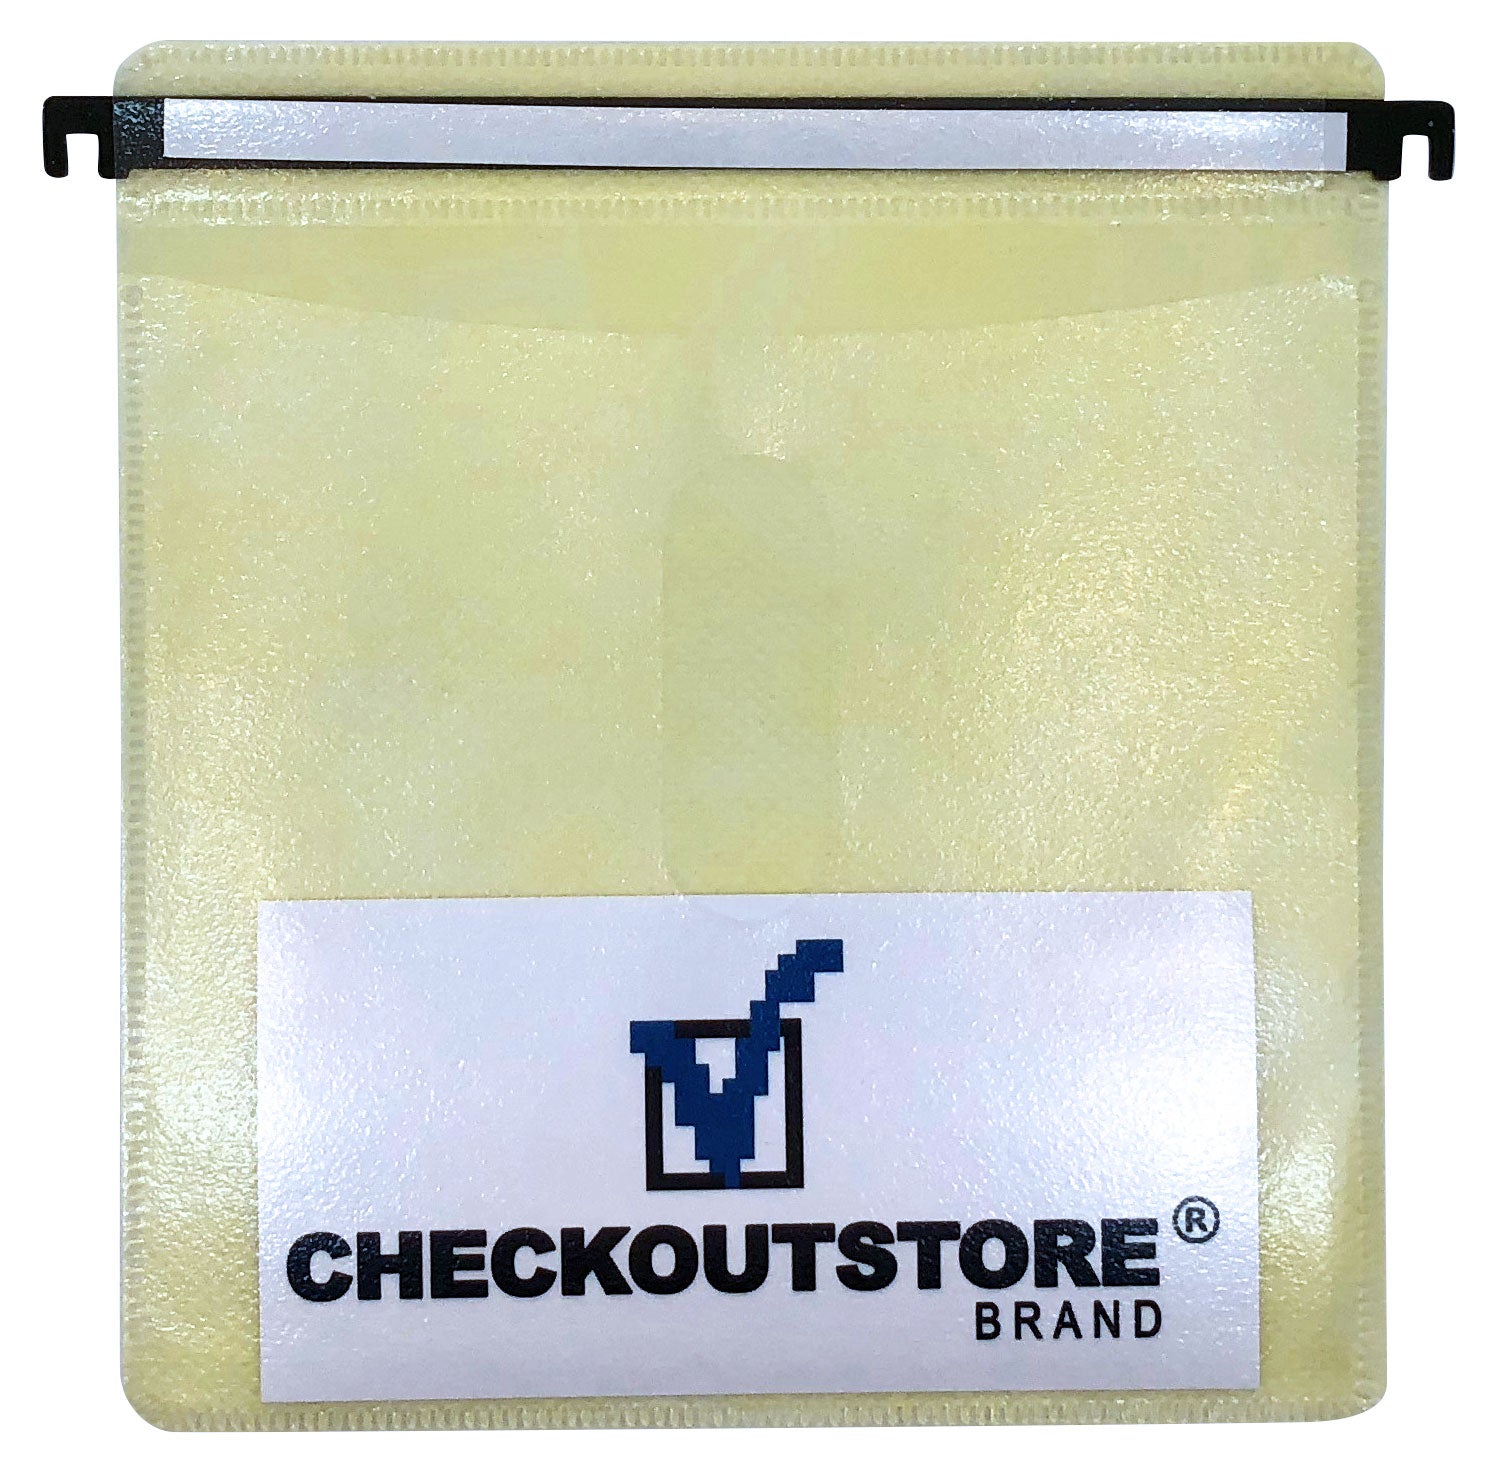 100 CheckOutStore® CD Double-sided Refill Plastic Hanging Sleeve - Yellow